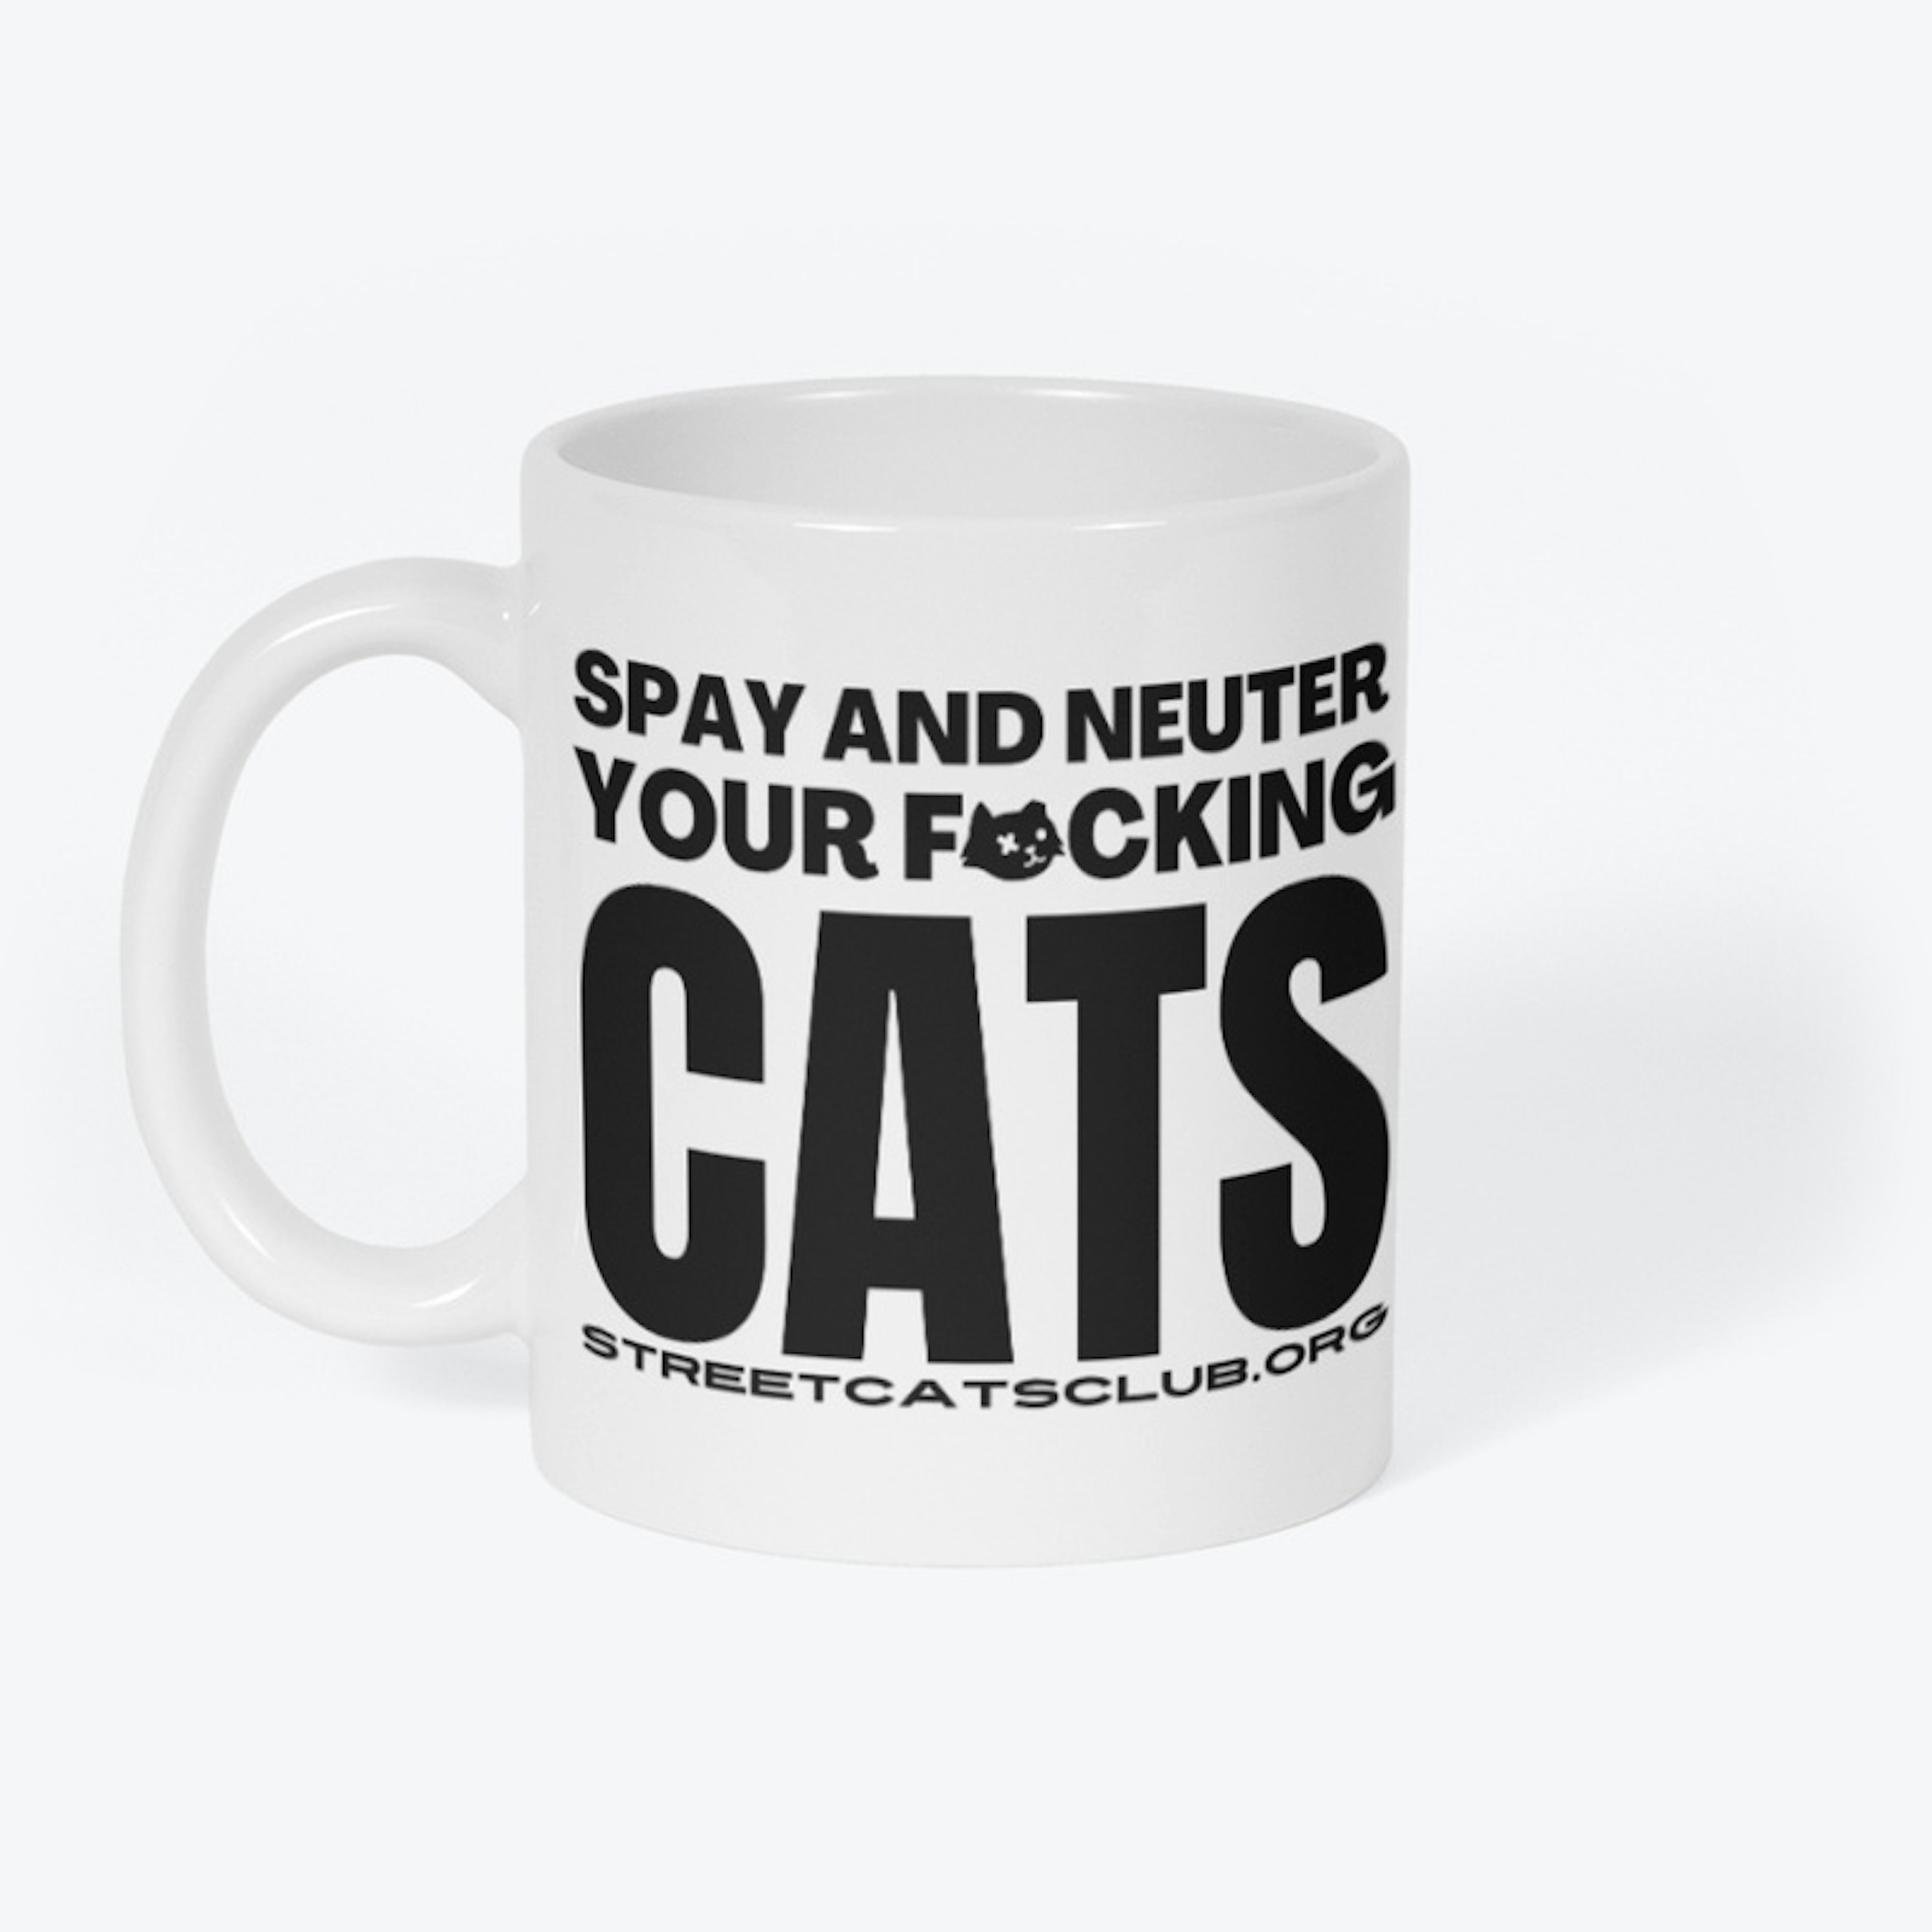 Spay and Neuter Your F*cking Cats Mug